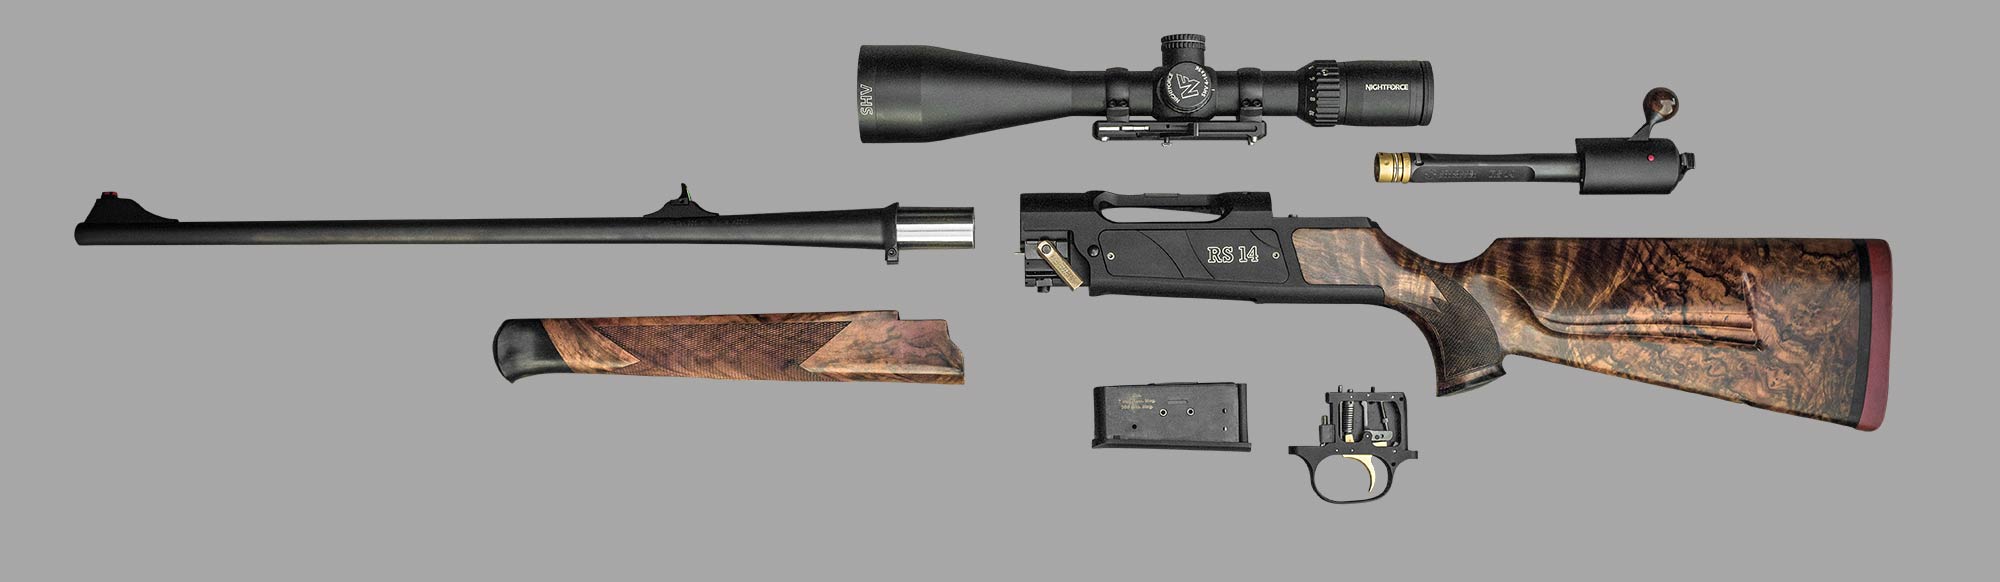 STRASSER RS 14 hunting rifle